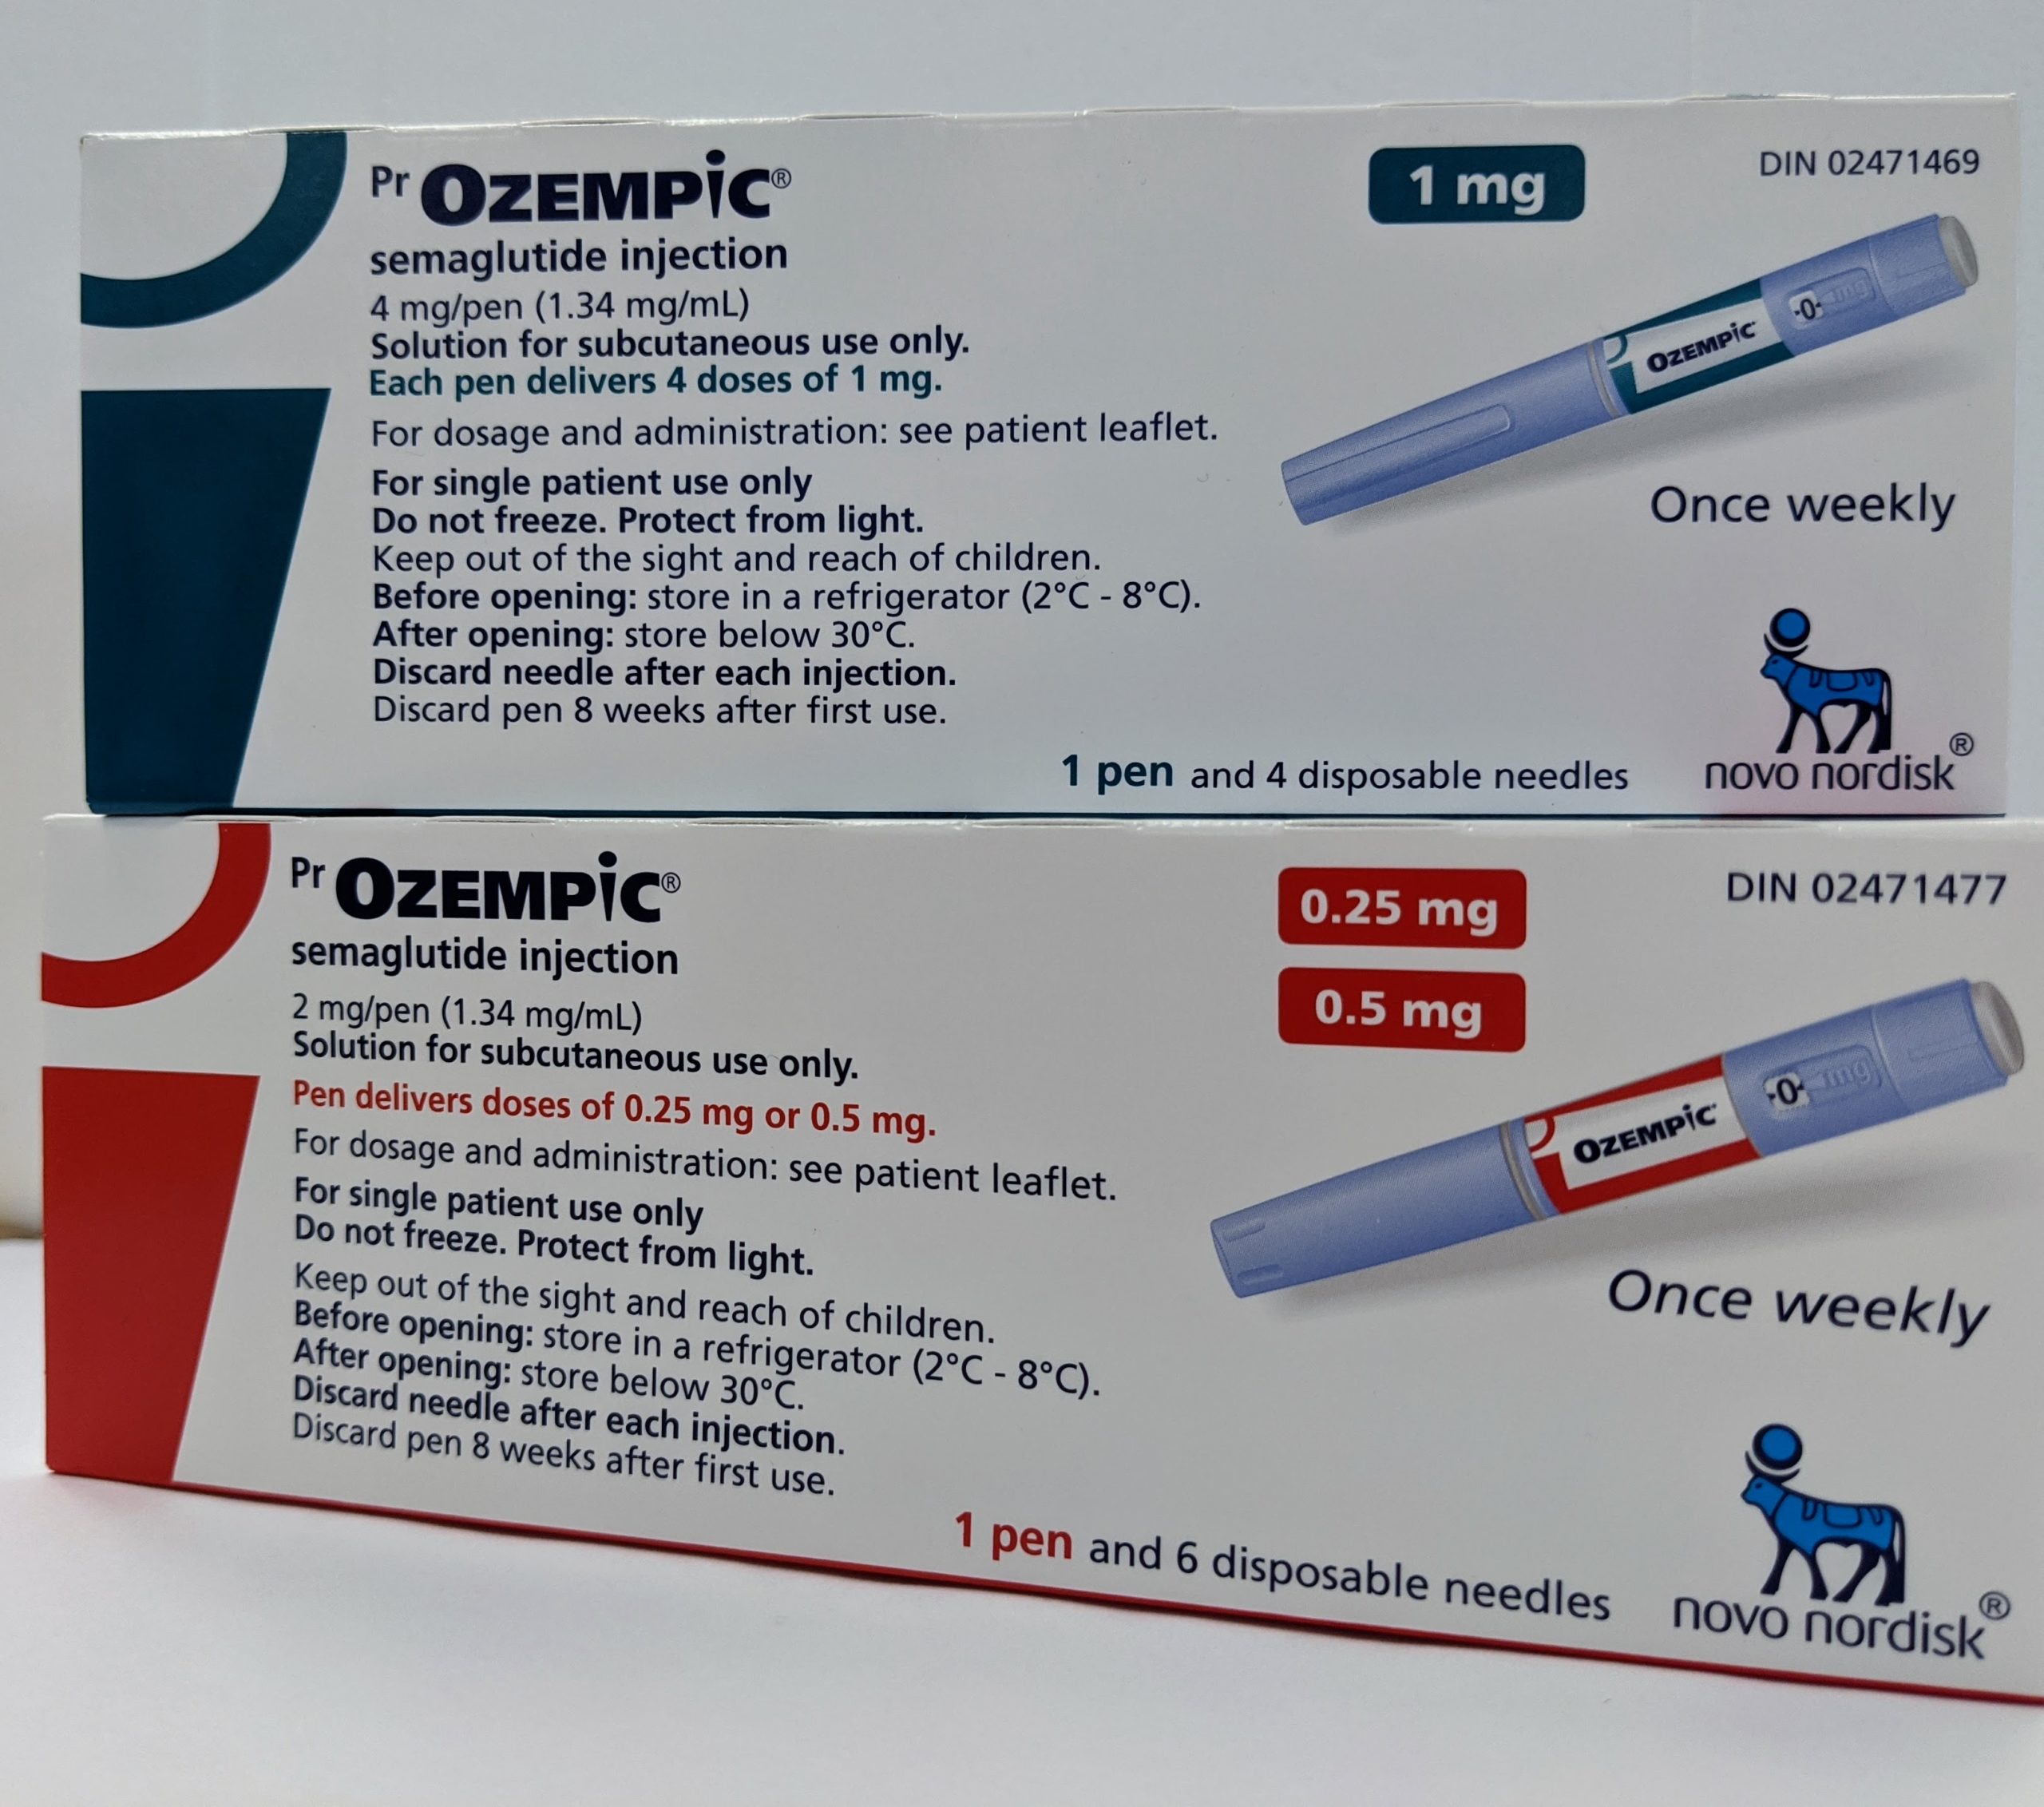 Buy Ozempic 0.25mg-0.5mg from Canada at Low Prices from InsulinOnline